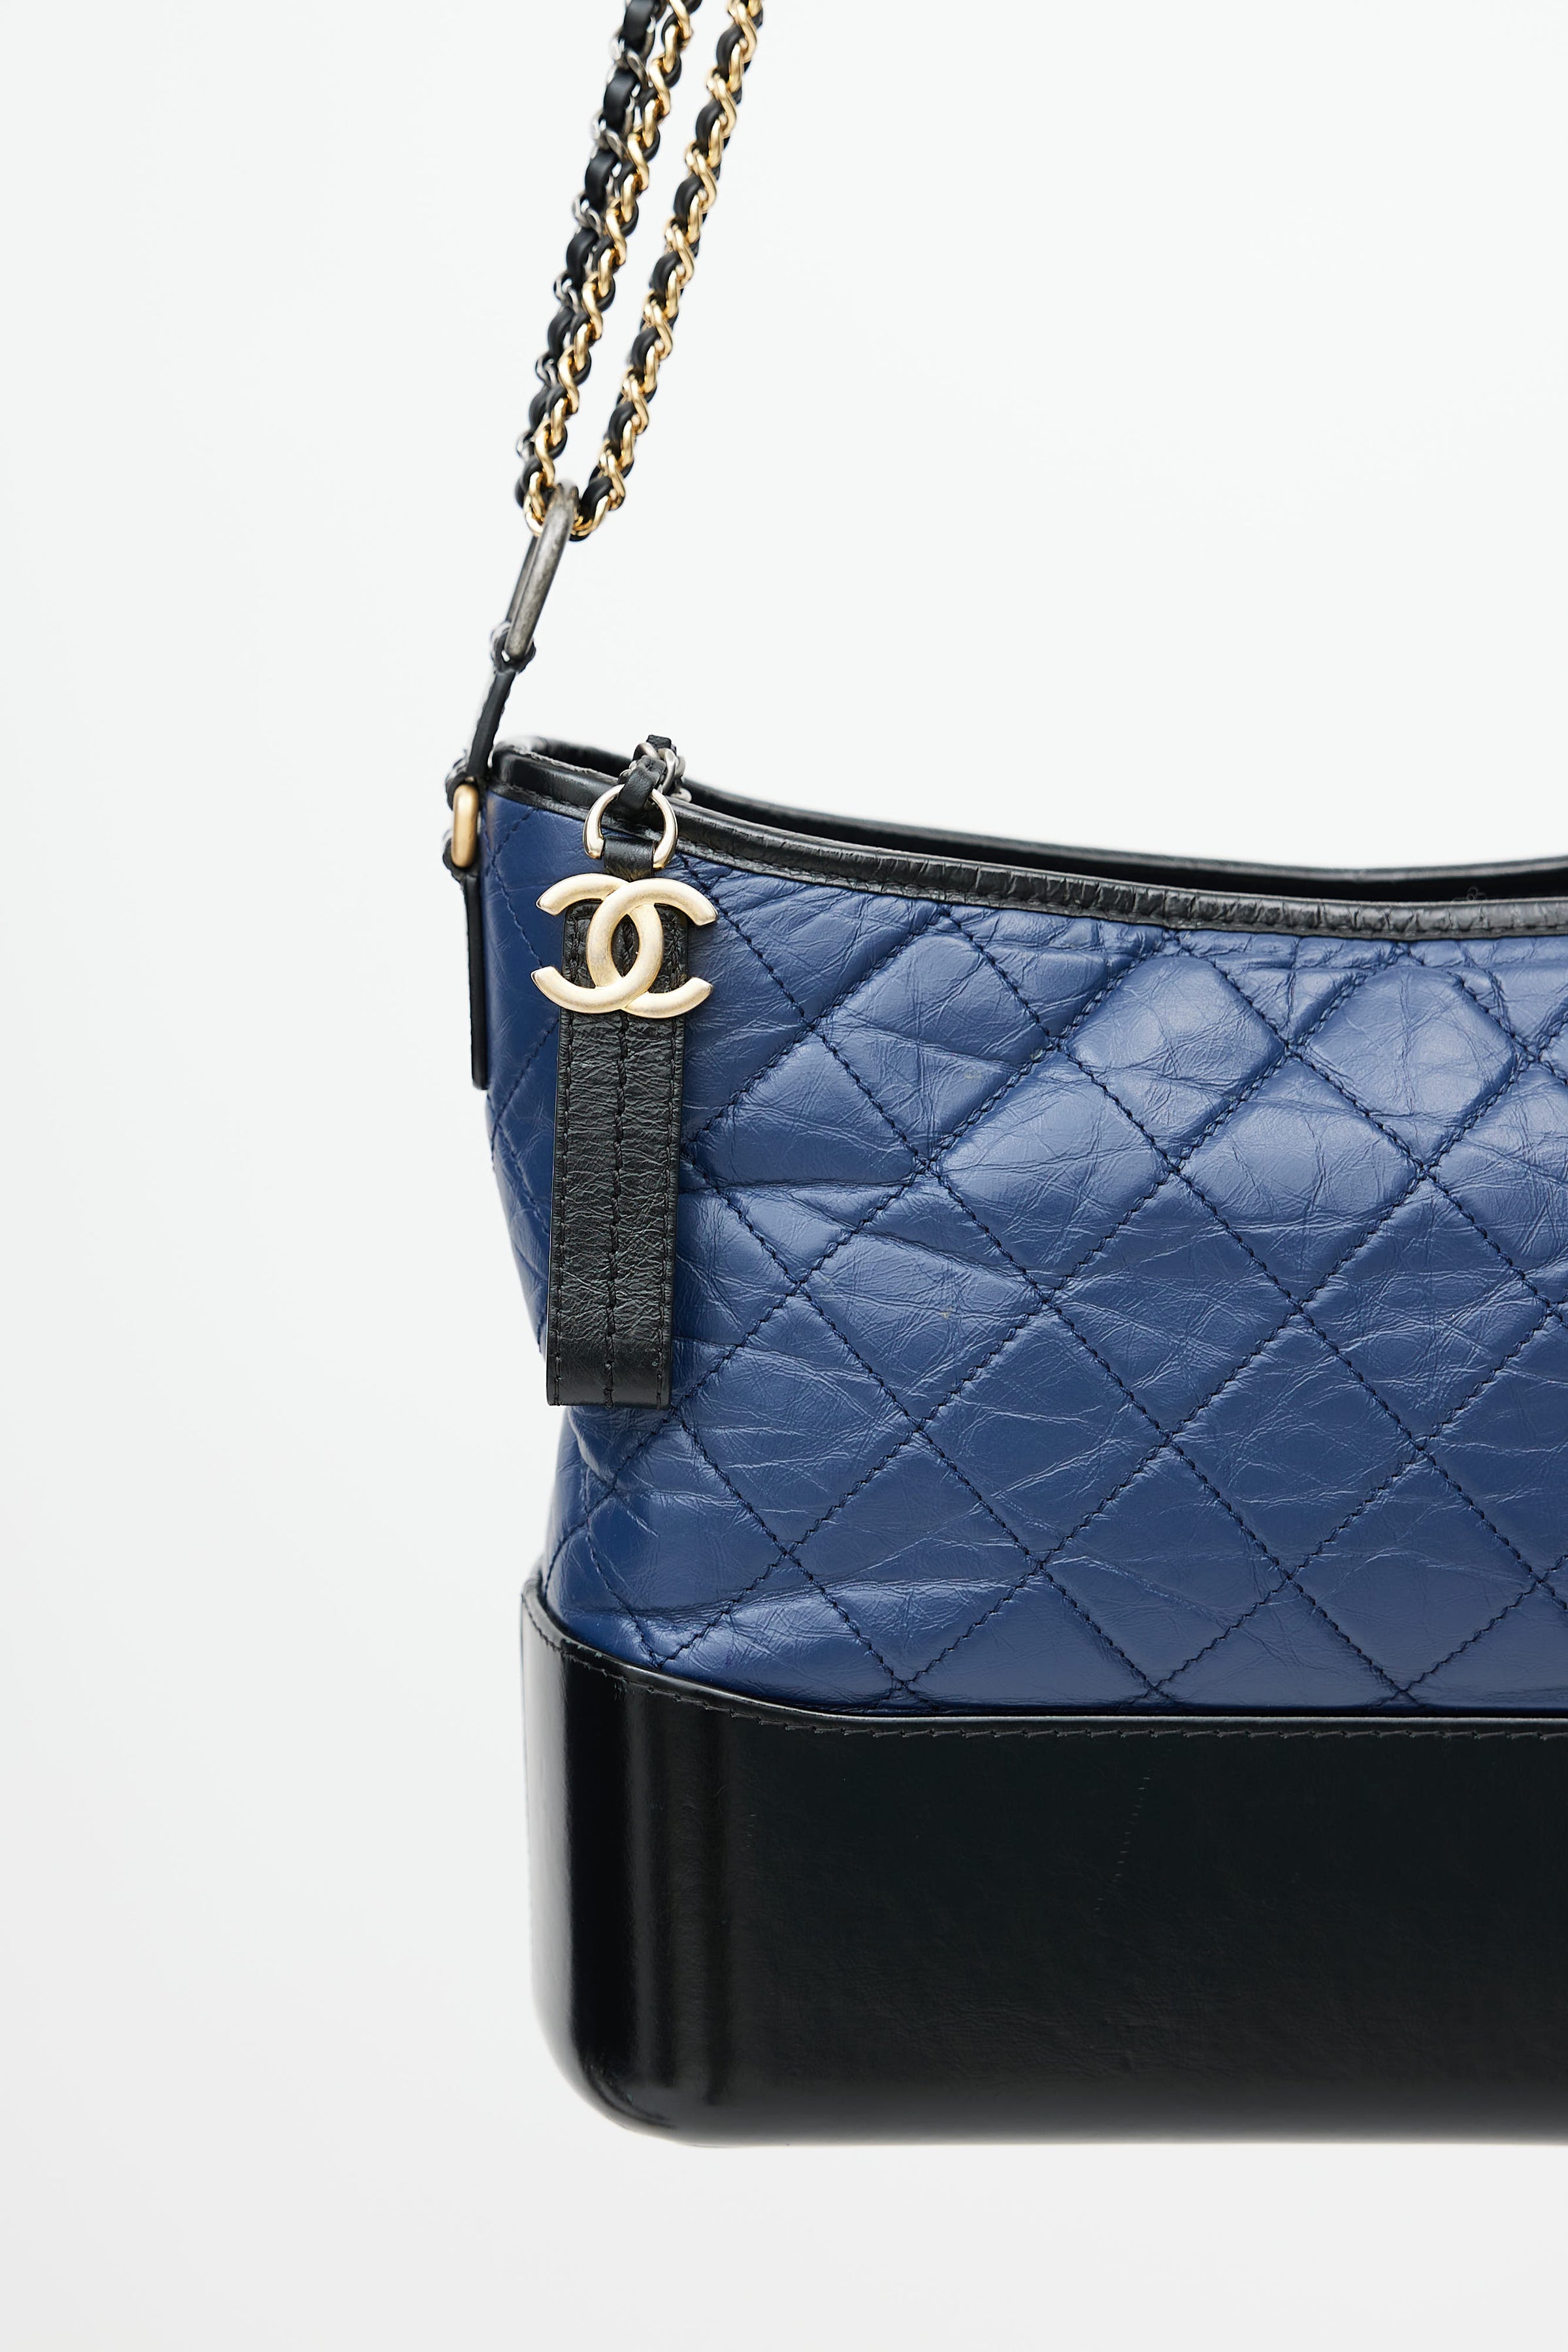 Chanel 2018 Gabrielle Black Quilted Leather Cosmetic Clutch Bag